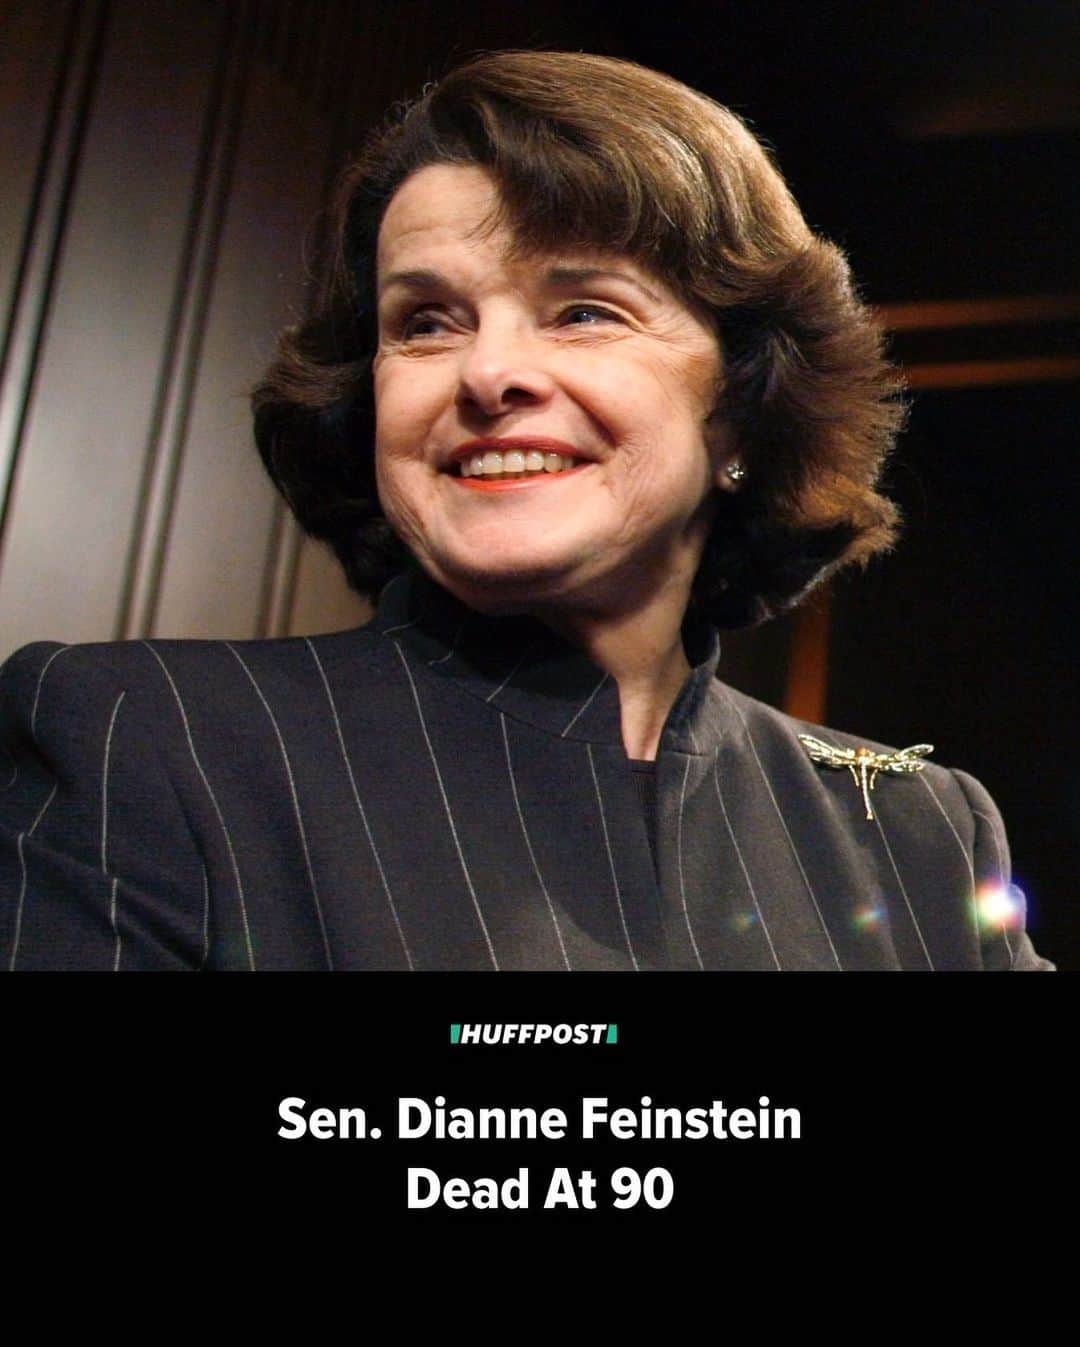 ブリジット・モイナハンさんのインスタグラム写真 - (ブリジット・モイナハンInstagram)「We lost an advocate and a true legend today.  RIP • @huffpost Dianne Feinstein, whose decadeslong political career was marked by numerous firsts, has died, according to multiple reports. She was 90. Feinstein made history as San Francisco's first female mayor and as the longest-serving female Senator.⁠ ⁠ Feinstein became San Francisco’s first female mayor in 1978 after then-Mayor George Moscone was murdered along with City Supervisor Harvey Milk in a case that shook the country. Feinstein, who had been the San Francisco Board of Supervisor’s first female president at the time of the shooting, later became one of the most prominent national advocates for gun control. As a U.S. senator, Feinstein introduced the 1994 bill banning assault weapons nationally.⁠ ⁠ “This is something I’m deeply passionate about, and I believe it saves lives,” she later said. “I don’t intend to stop.”⁠ ⁠ Feinstein was also the first woman to chair the Senate Rules Committee.⁠ ⁠ A champion for victim’s rights who helped create the AMBER alert system for missing children, Feinstein was known for being tough on crime. She was criticized for leaning farther right than many of her Democratic colleagues on issues like the war on drugs and immigration.⁠ ⁠ Feinstein was nevertheless a well-liked official, winning reelection four times. In 2012, she shattered the record for the most popular votes in Senate election history.⁠ ⁠ Though this would change during her final years in office, many praised Feinstein for seemingly never slowing down. Read more about Feinstein's life at our link in bio. // 📷 Reuters // 🖊️ Alana Horowitz Satlin, Lydia O'Connor & Marita Vlachou」9月30日 4時08分 - bridgetmoynahan